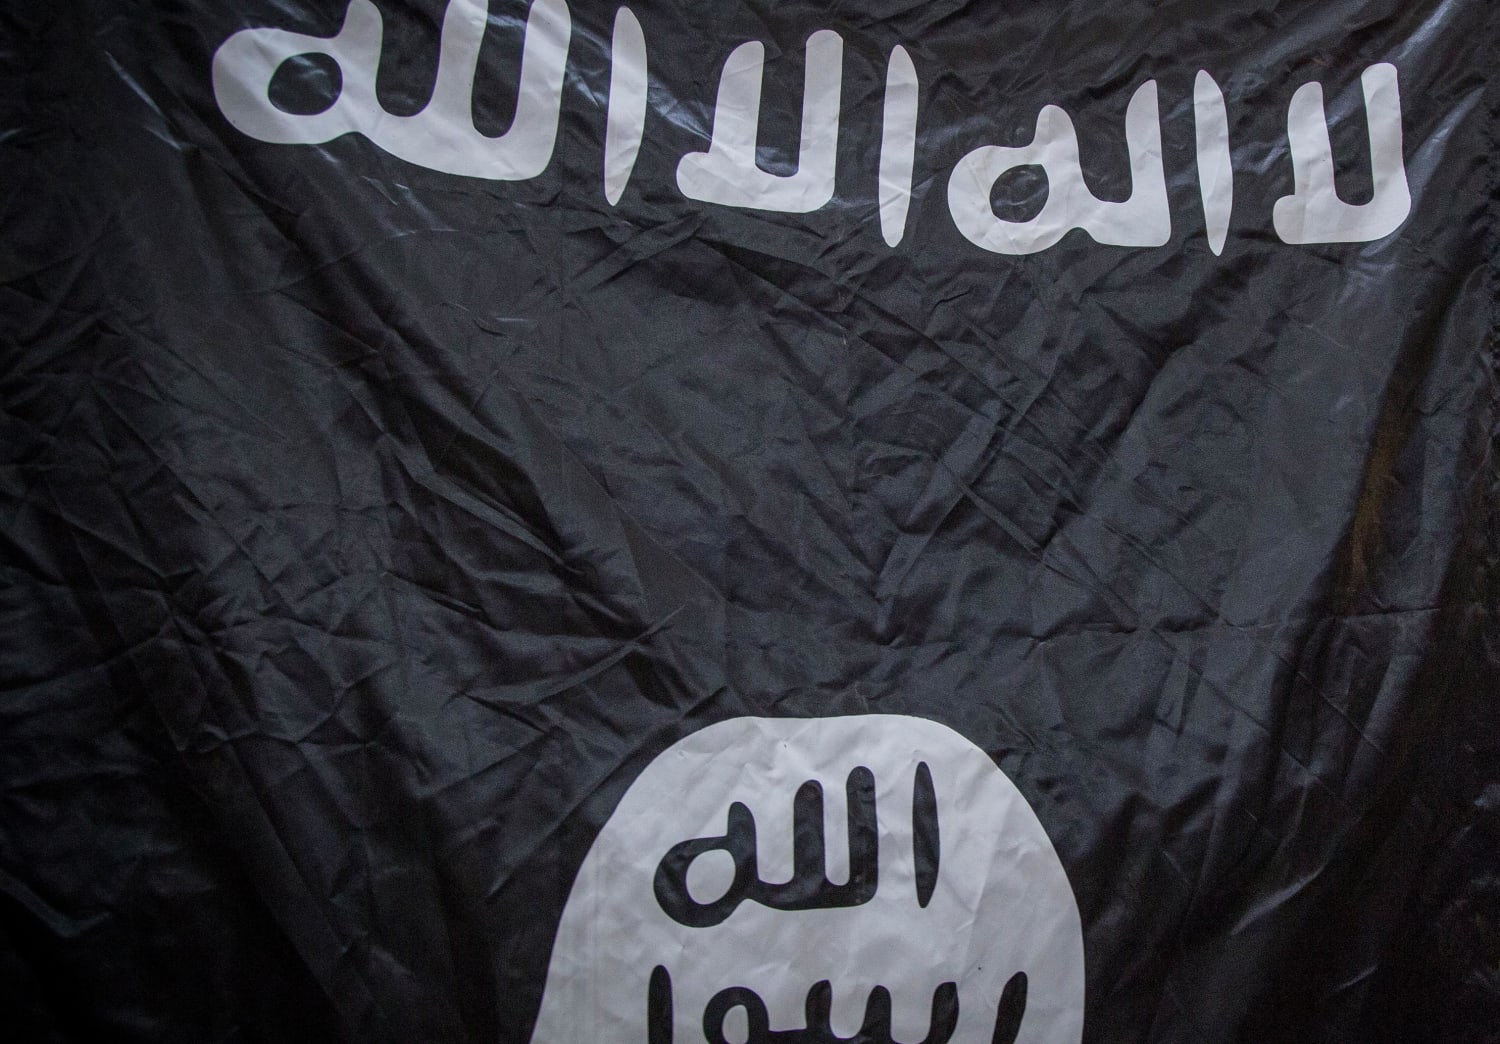 140826-isis-flag-jhc-1227_5fabe4a4c3ec27